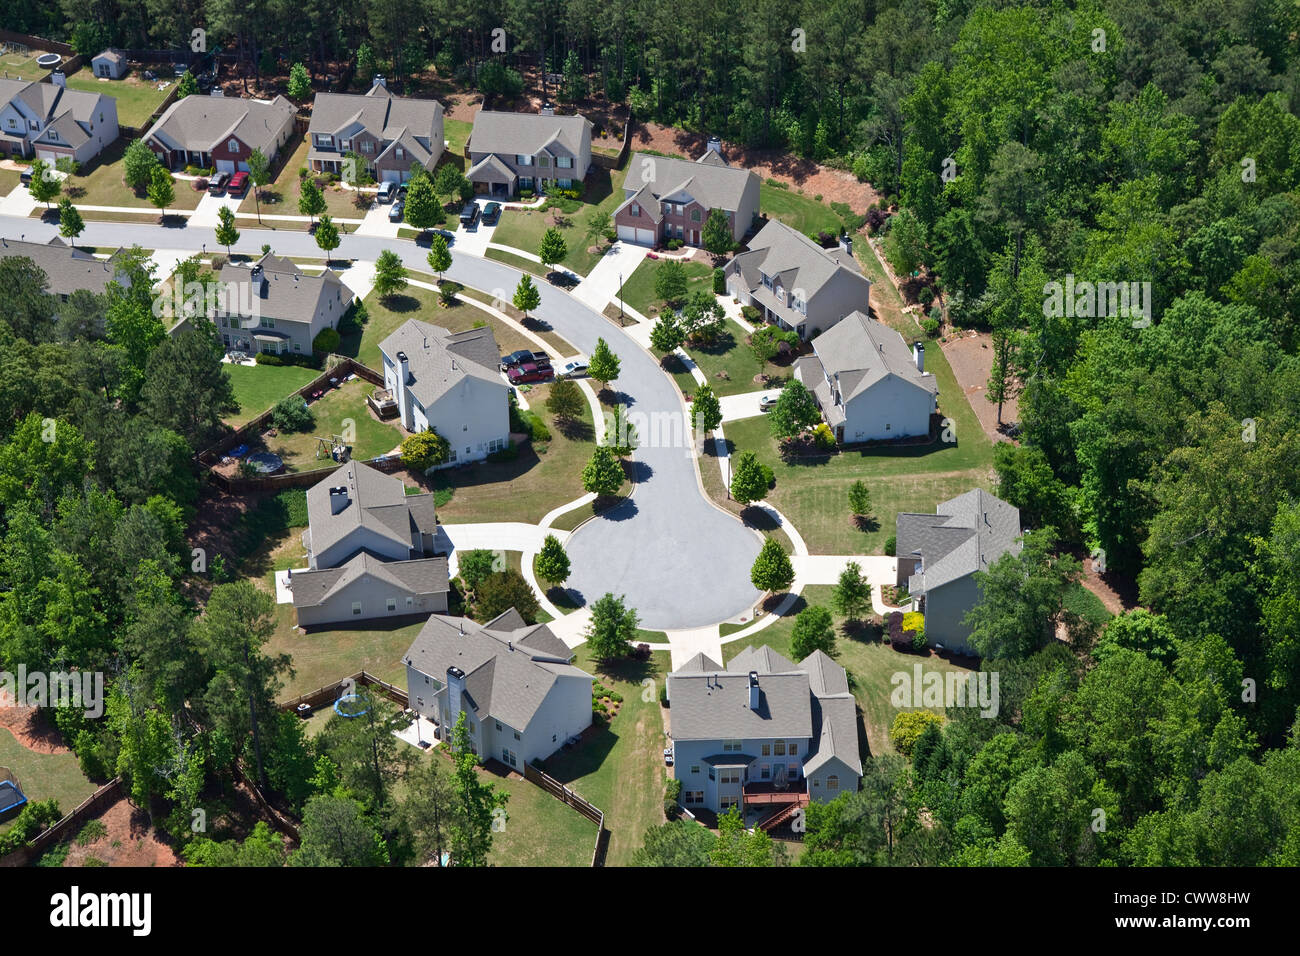 Modern comfortable middle class neighborhood aerial in the southeastern USA. Stock Photo